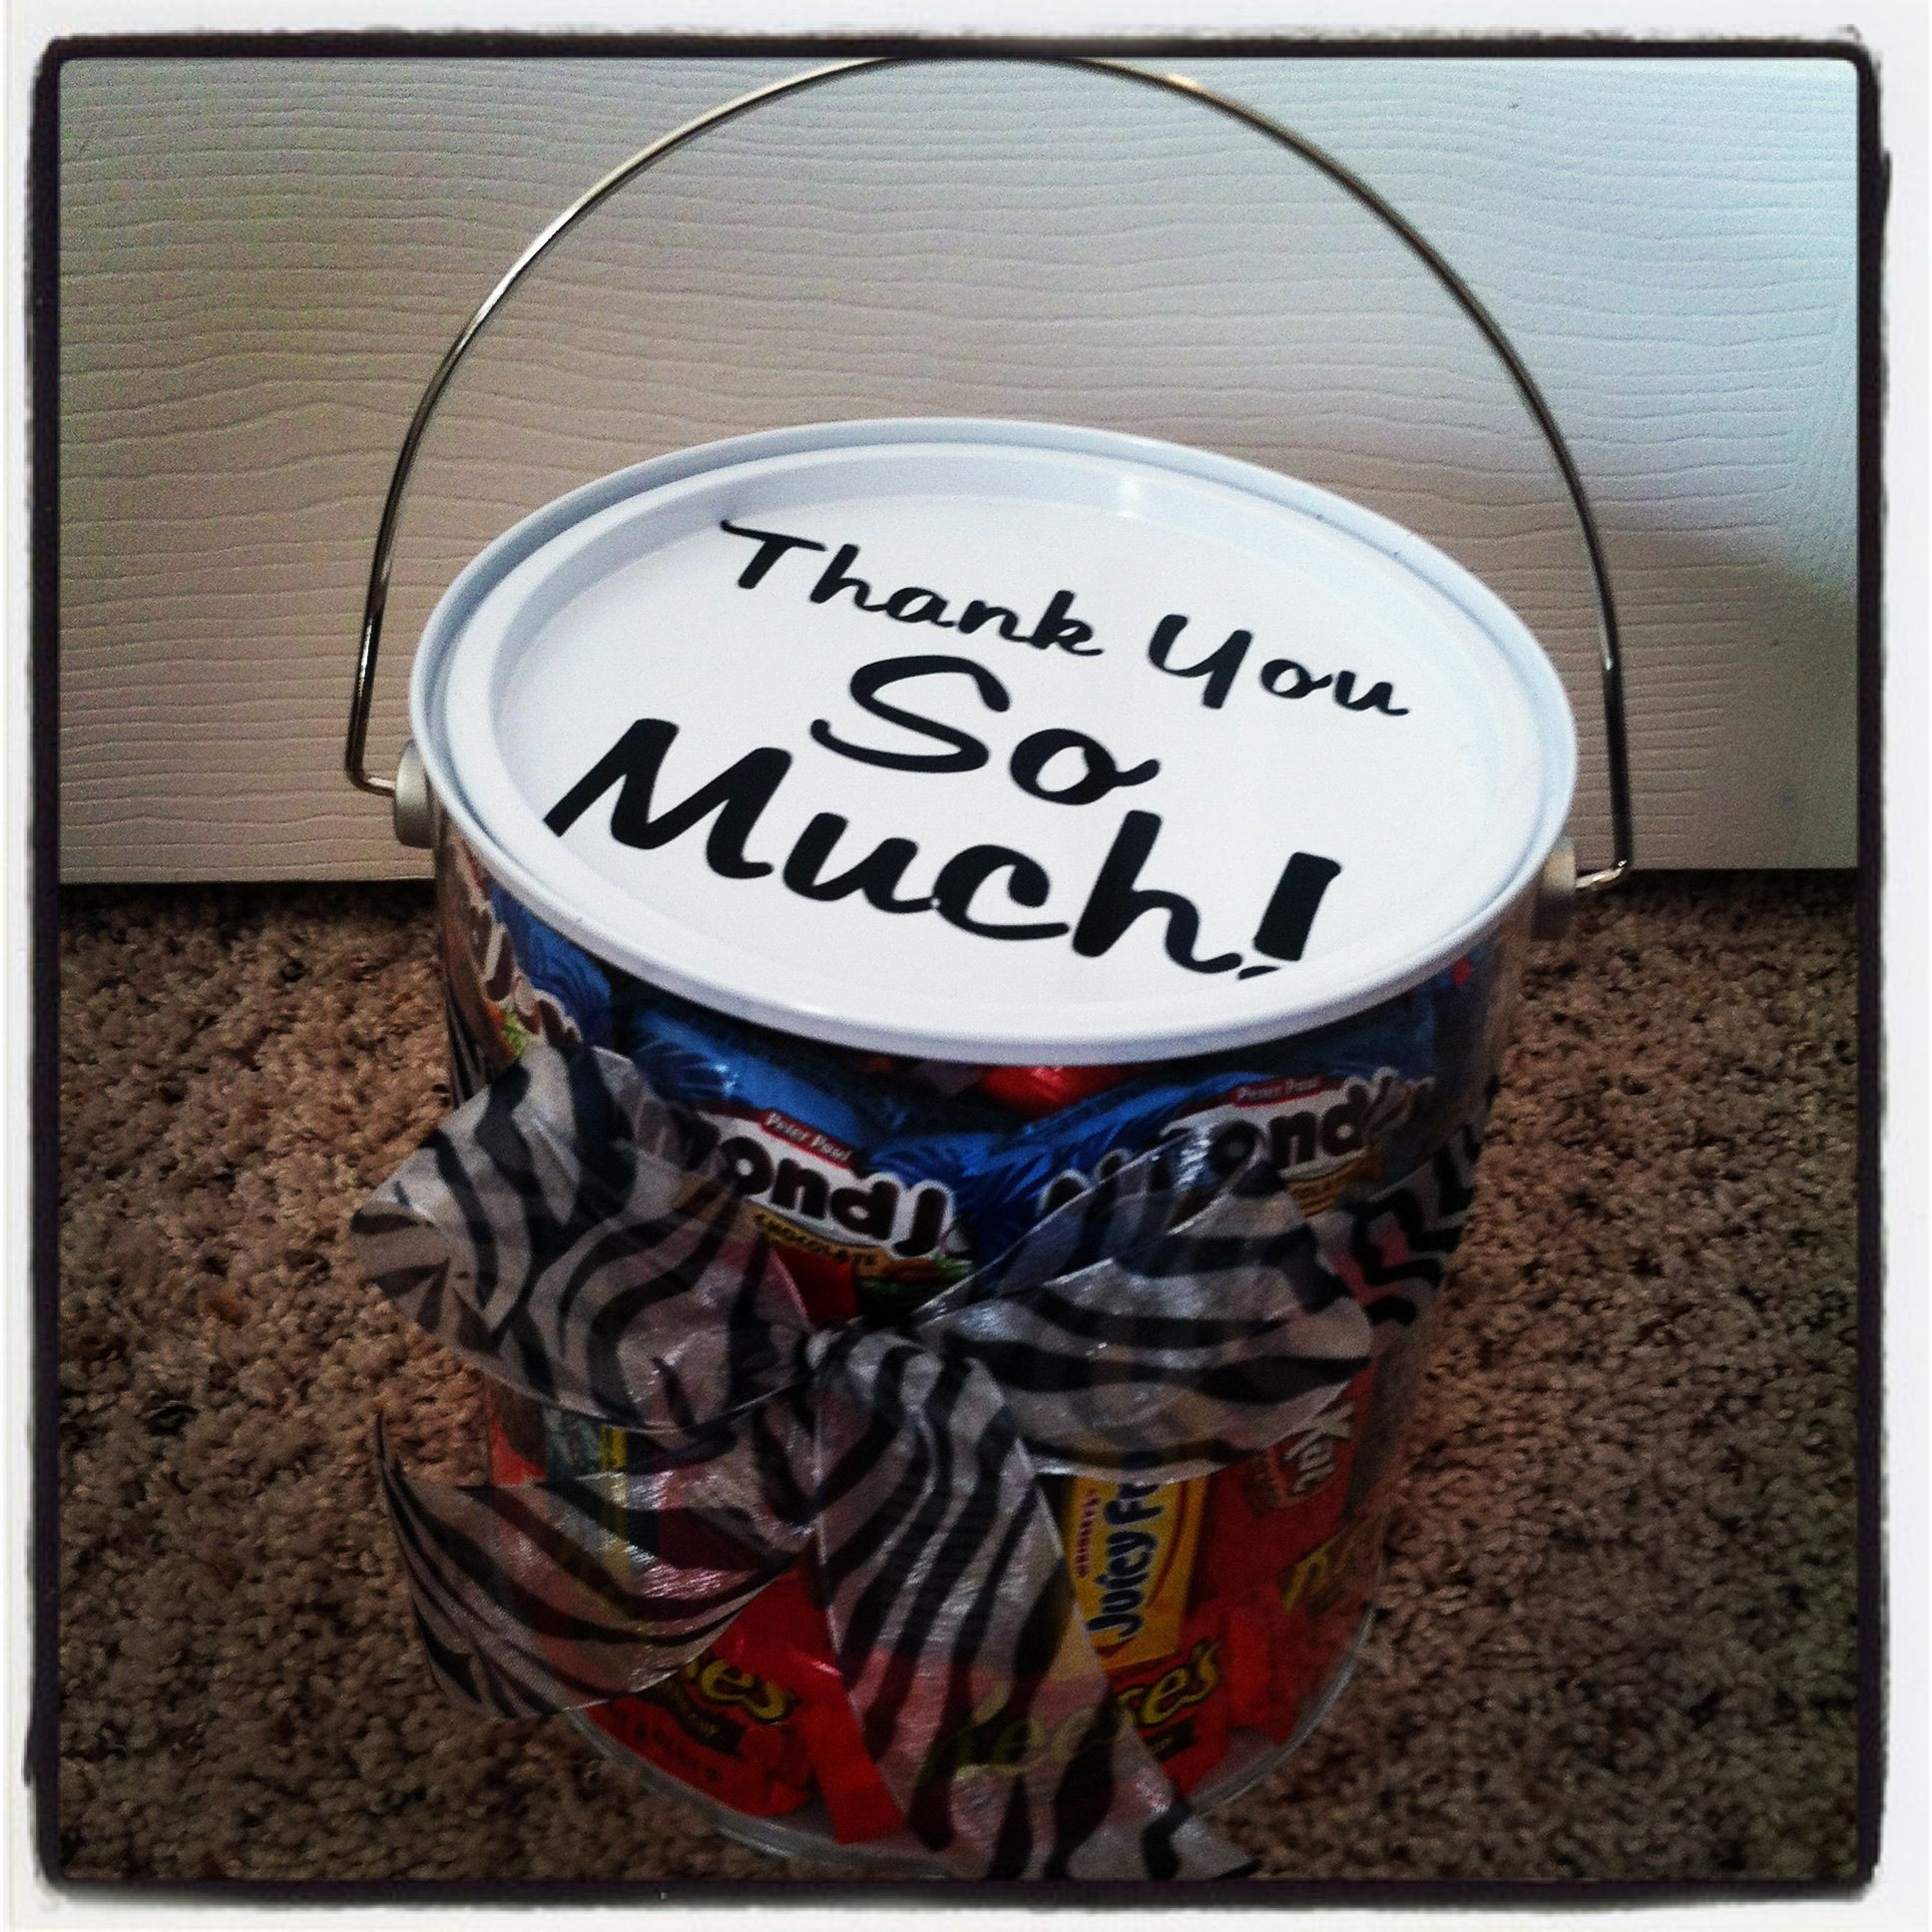 Coworker Thank You Gift Ideas
 "Thank you " Gift for coworkers t ideas